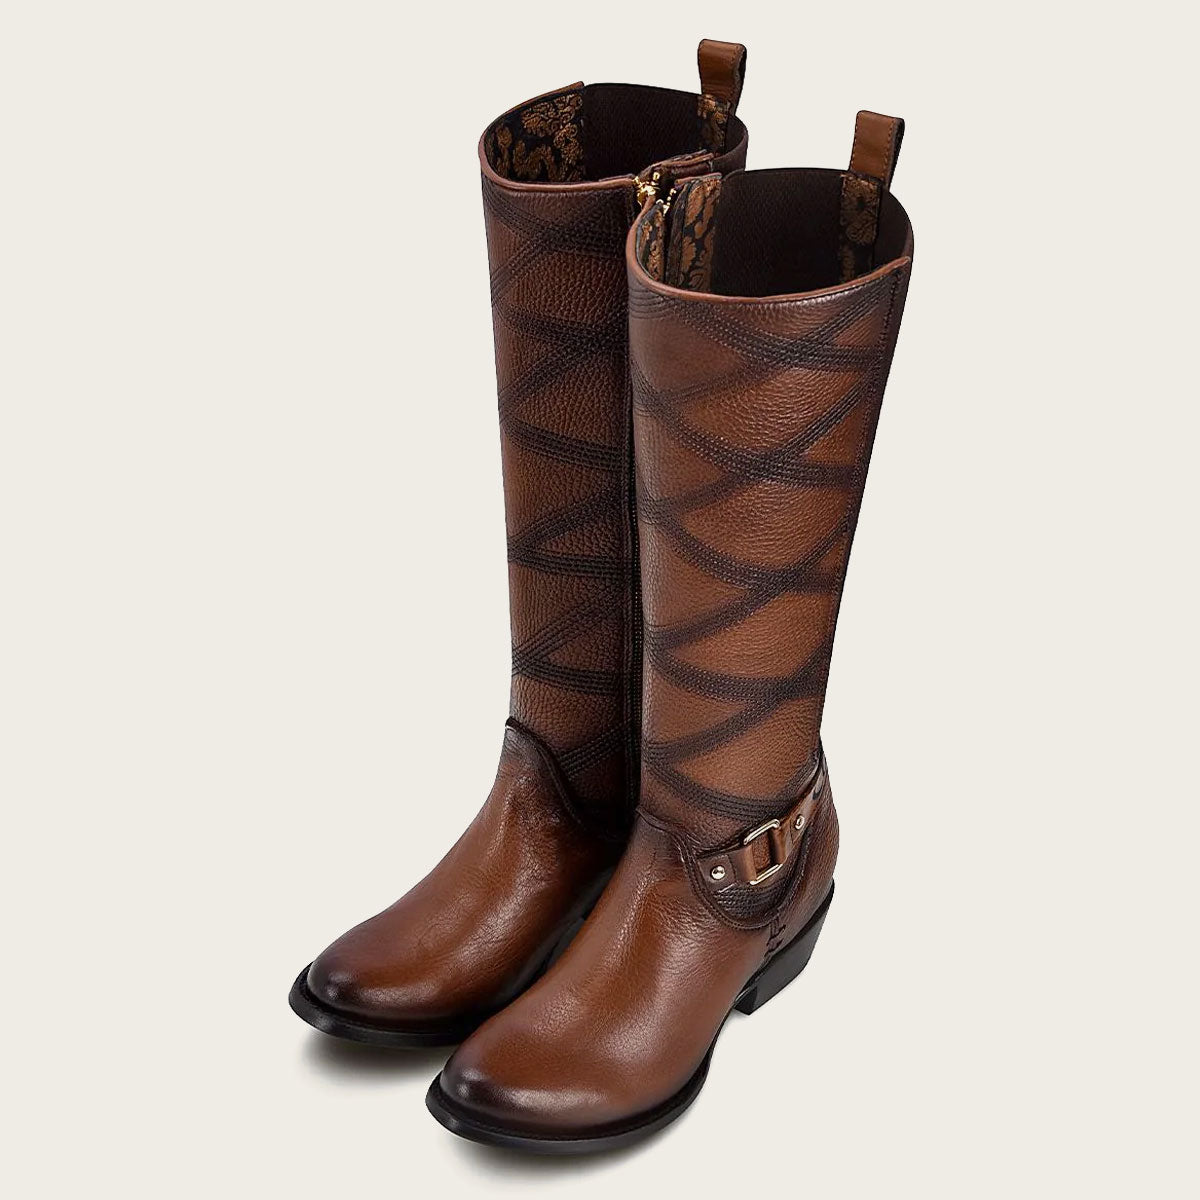 A beautiful honey-colored leather boot with intricate embroidery, perfect for adding a touch of elegance to any outfit.